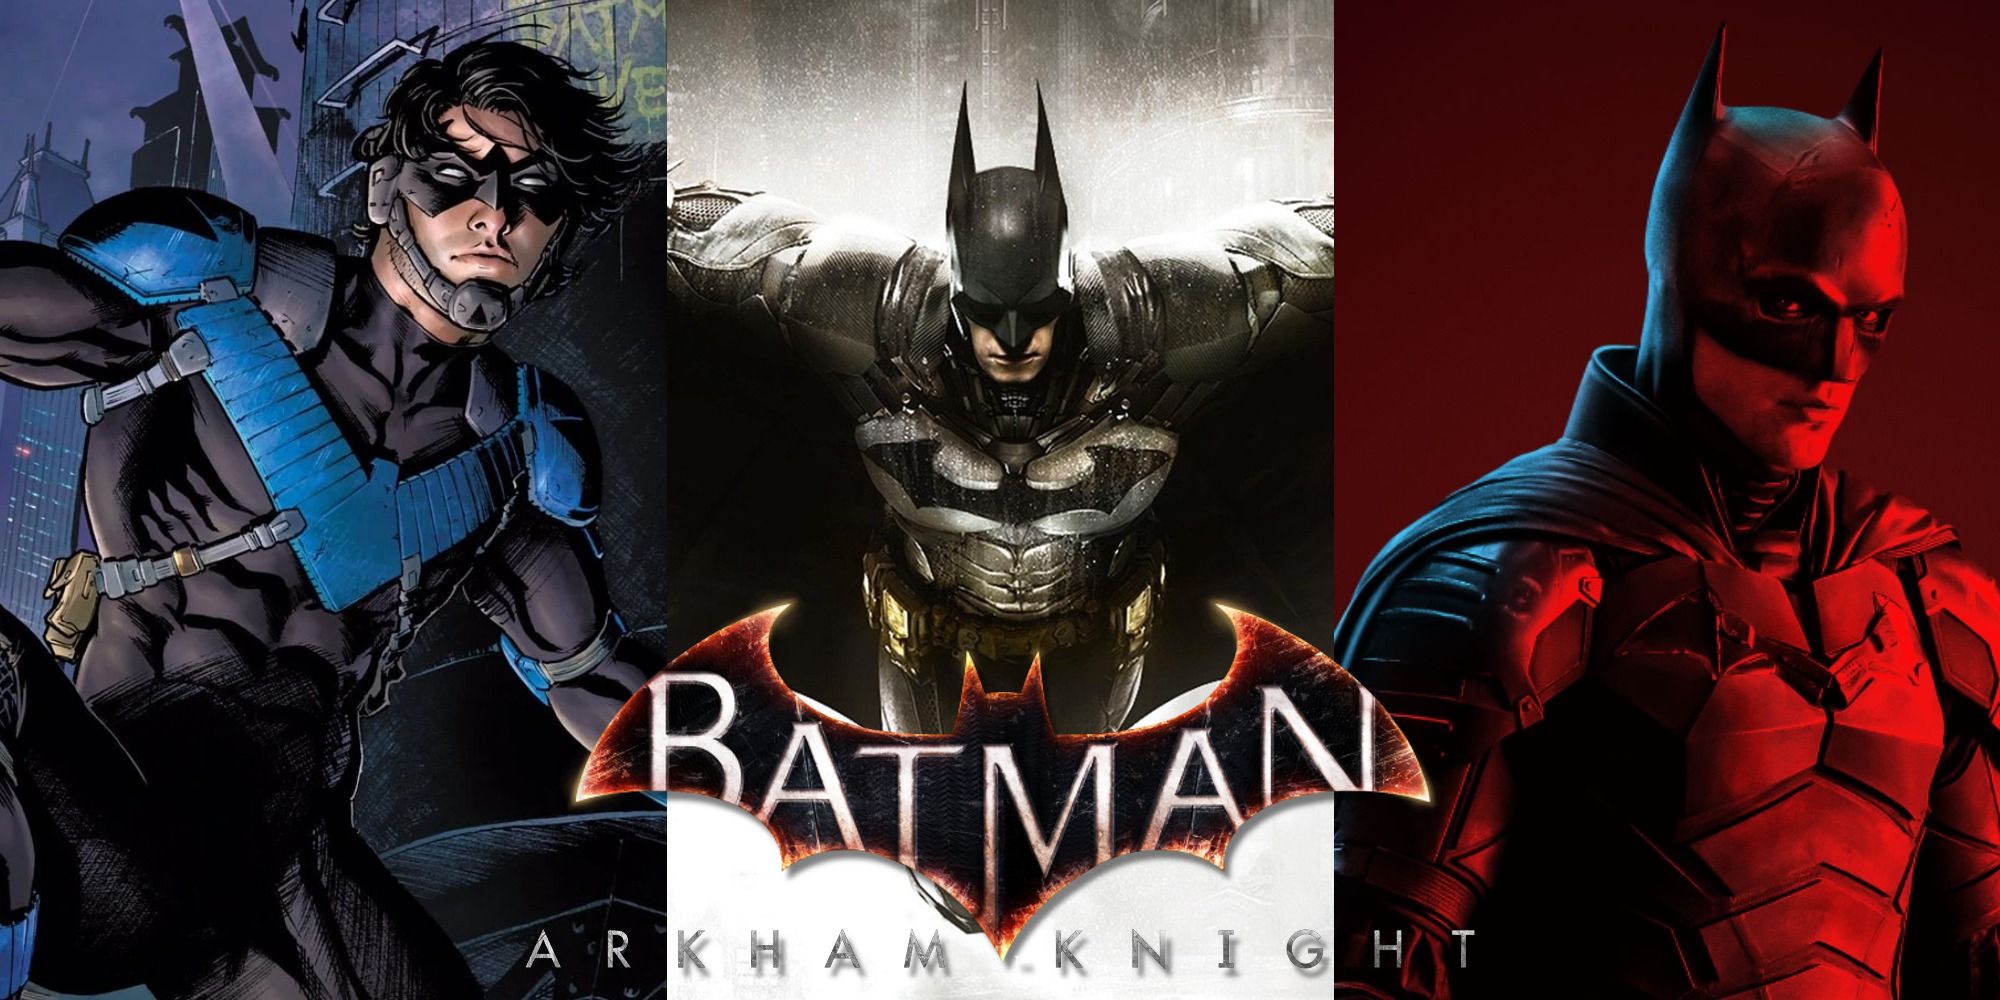 10 New Skins That Fans Would Love To See In Batman: Arkham Knight Remastered